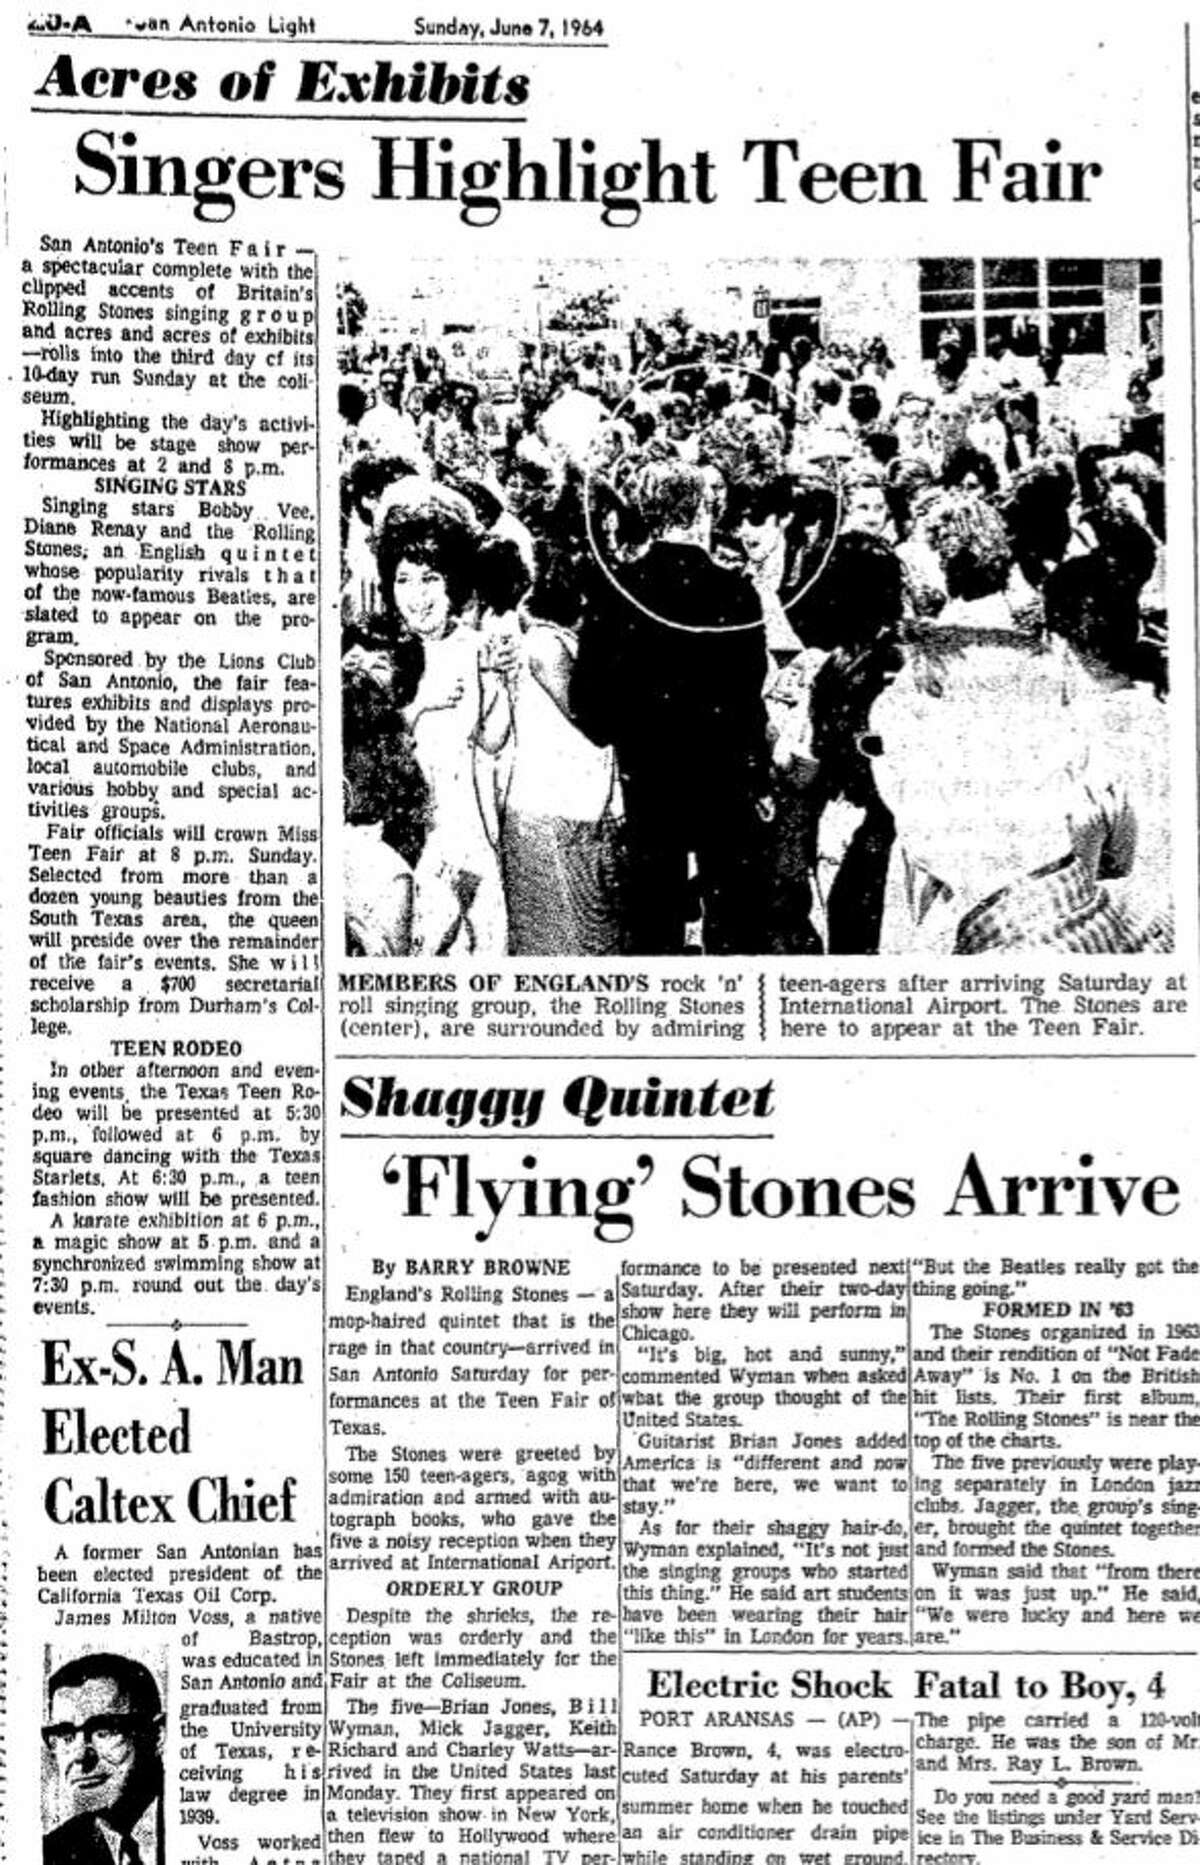 A San Antonio Light writer wrote about the Rolling Stones arriving at the San Antonio airport.